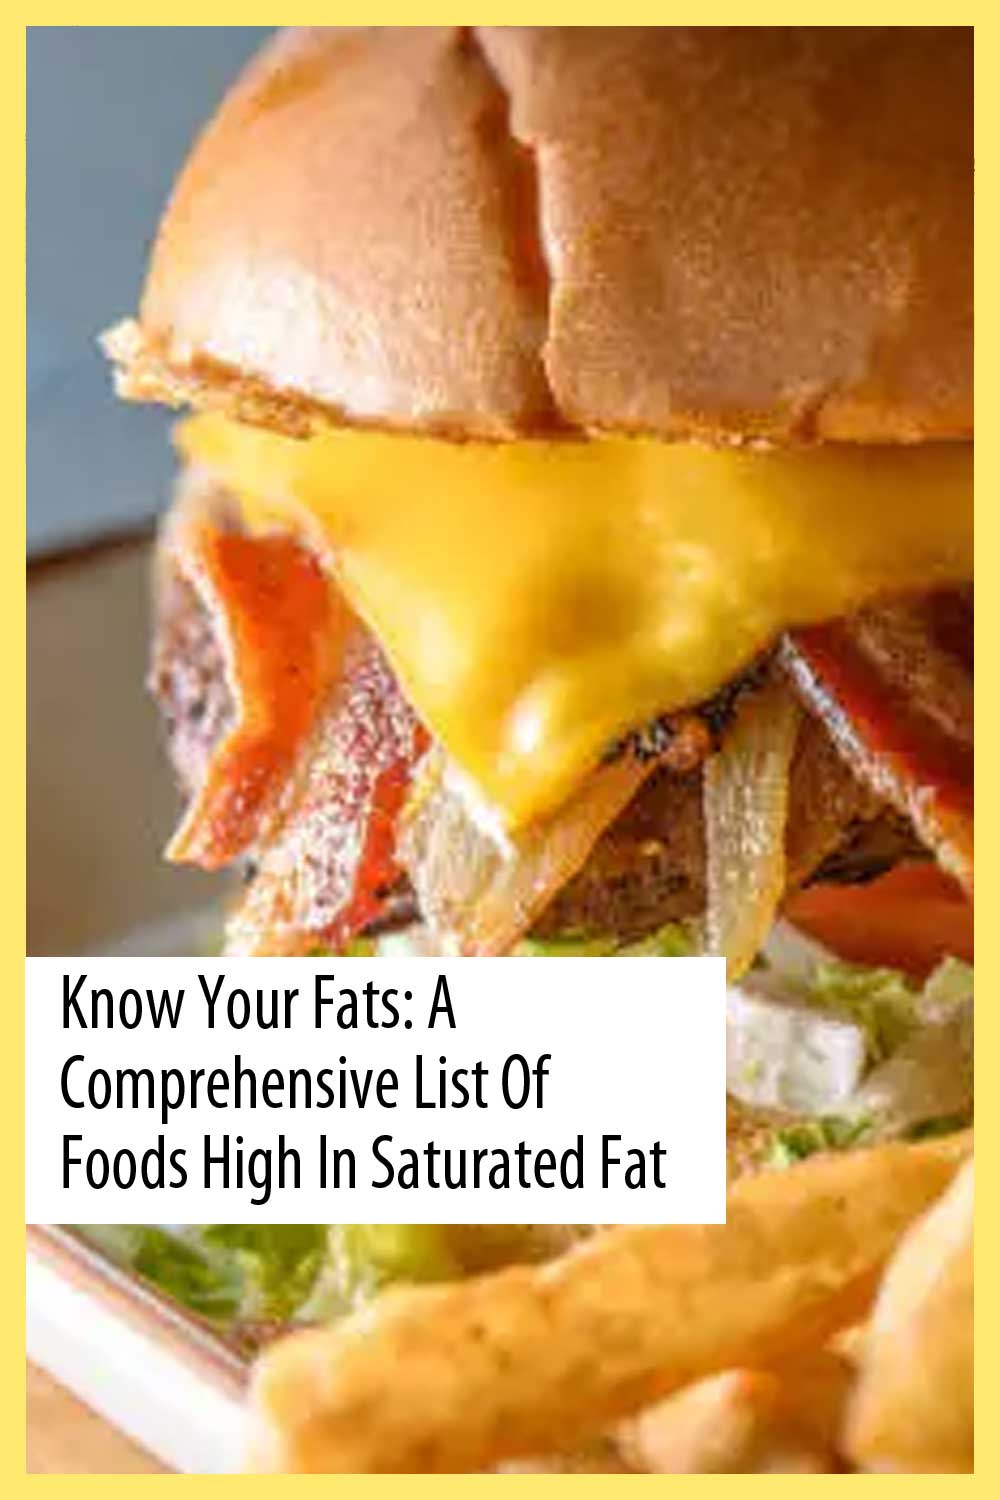 Know Your Fats: A Comprehensive List of Foods High in Saturated Fat